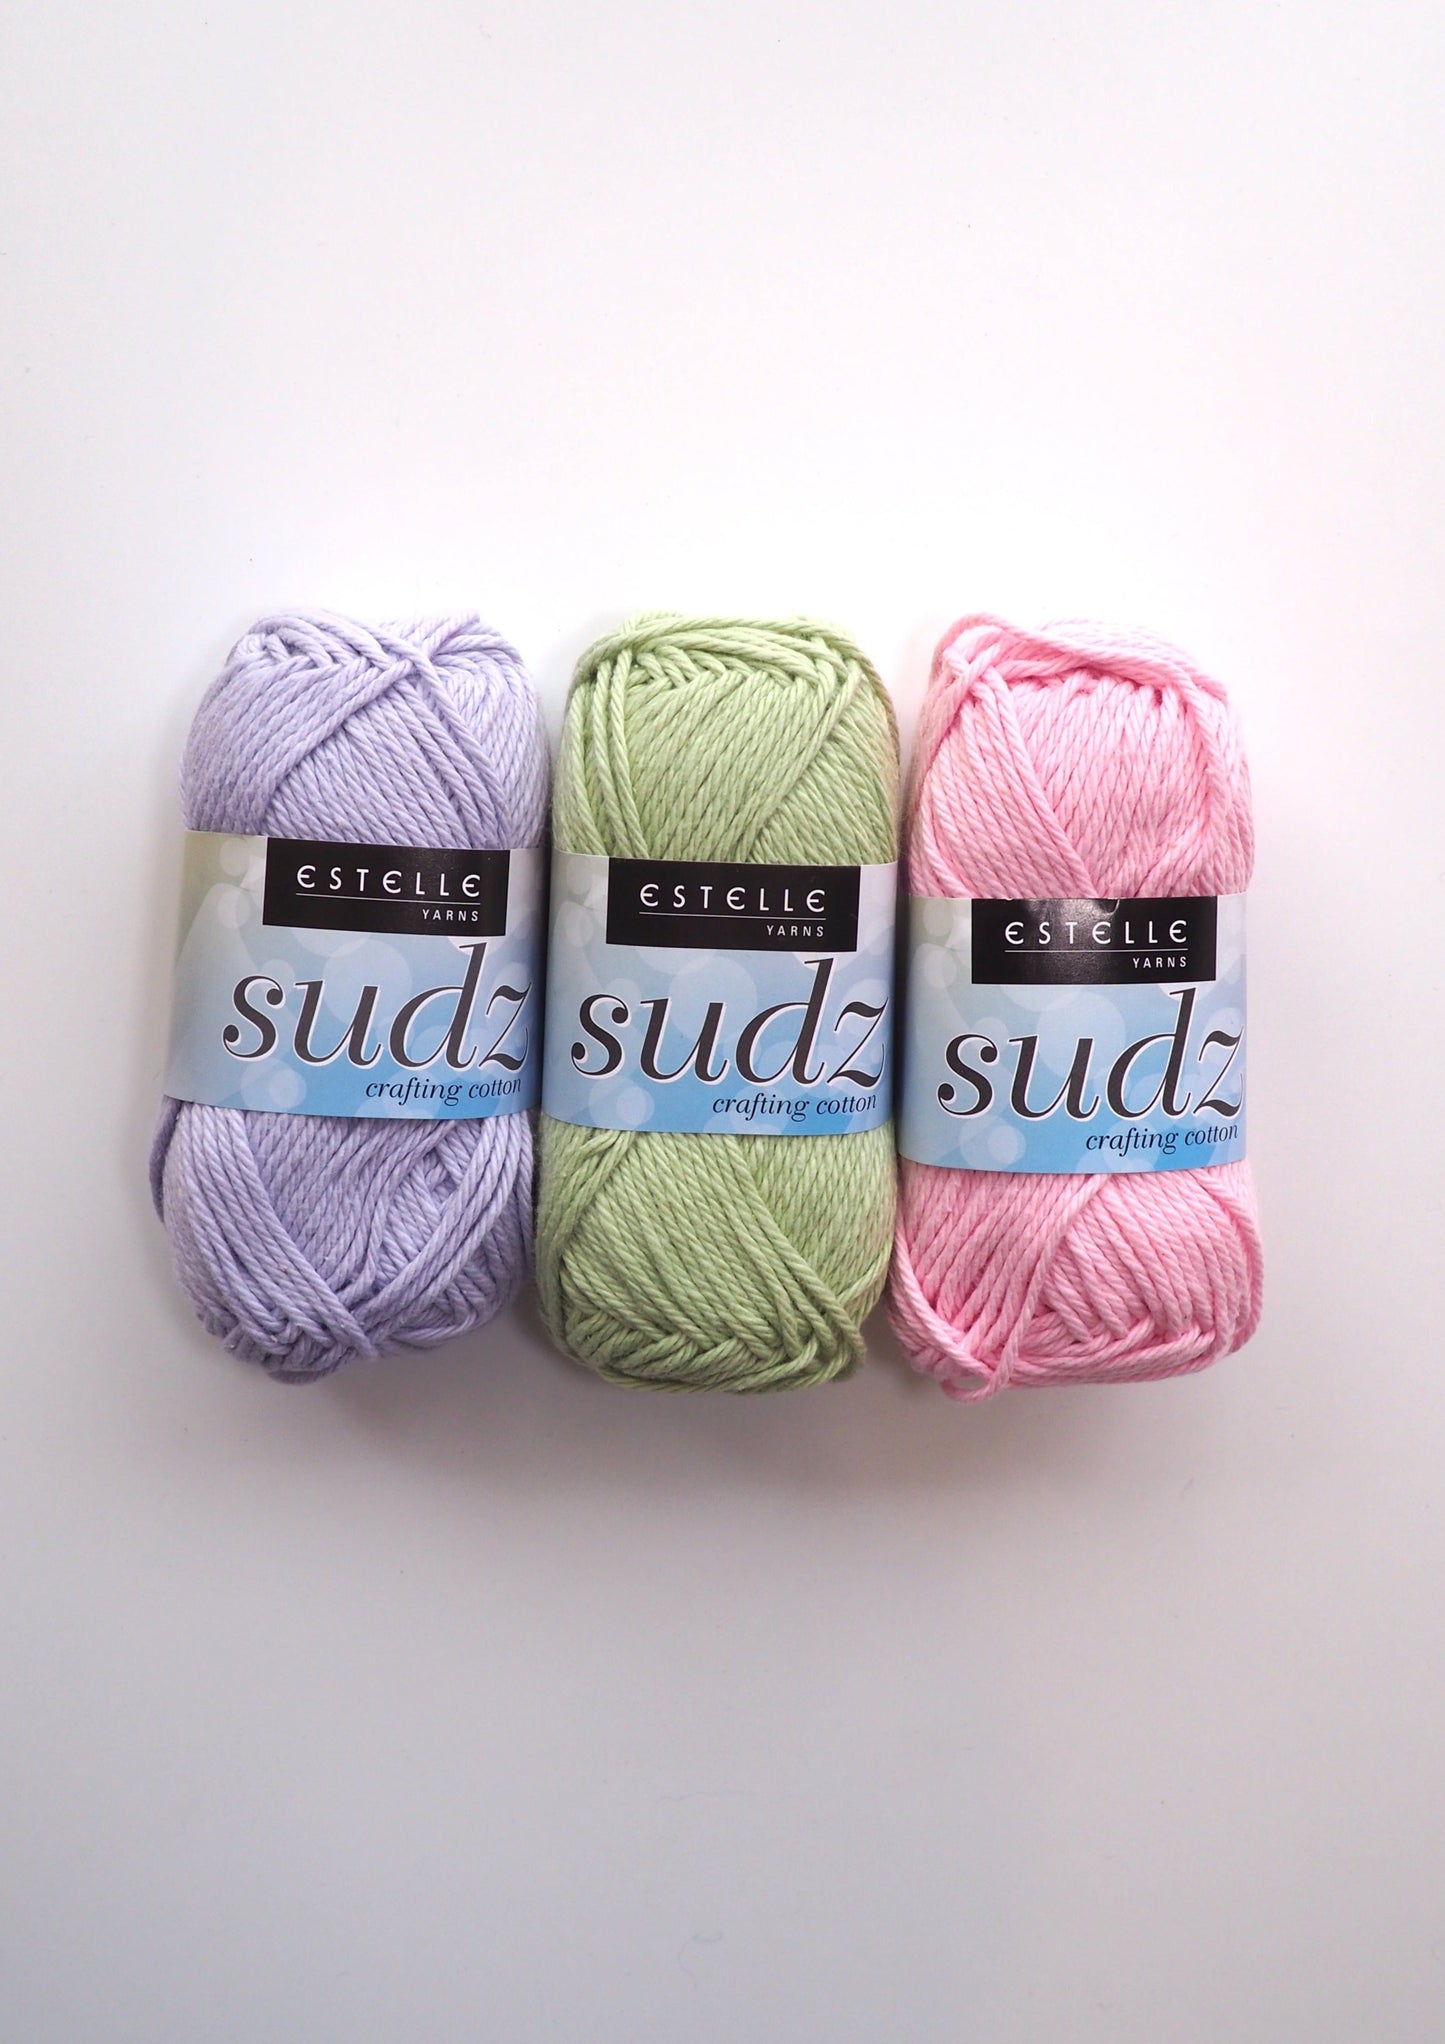 Image showcasing three balls of Estelle Cotton Sudz yarn. One ball is pistachio, one is violet, and one is pink. This versatile cotton yarn is perfect for durable crafts like washcloths and tote bags, as well as clothing items. Affordable and of high quality.